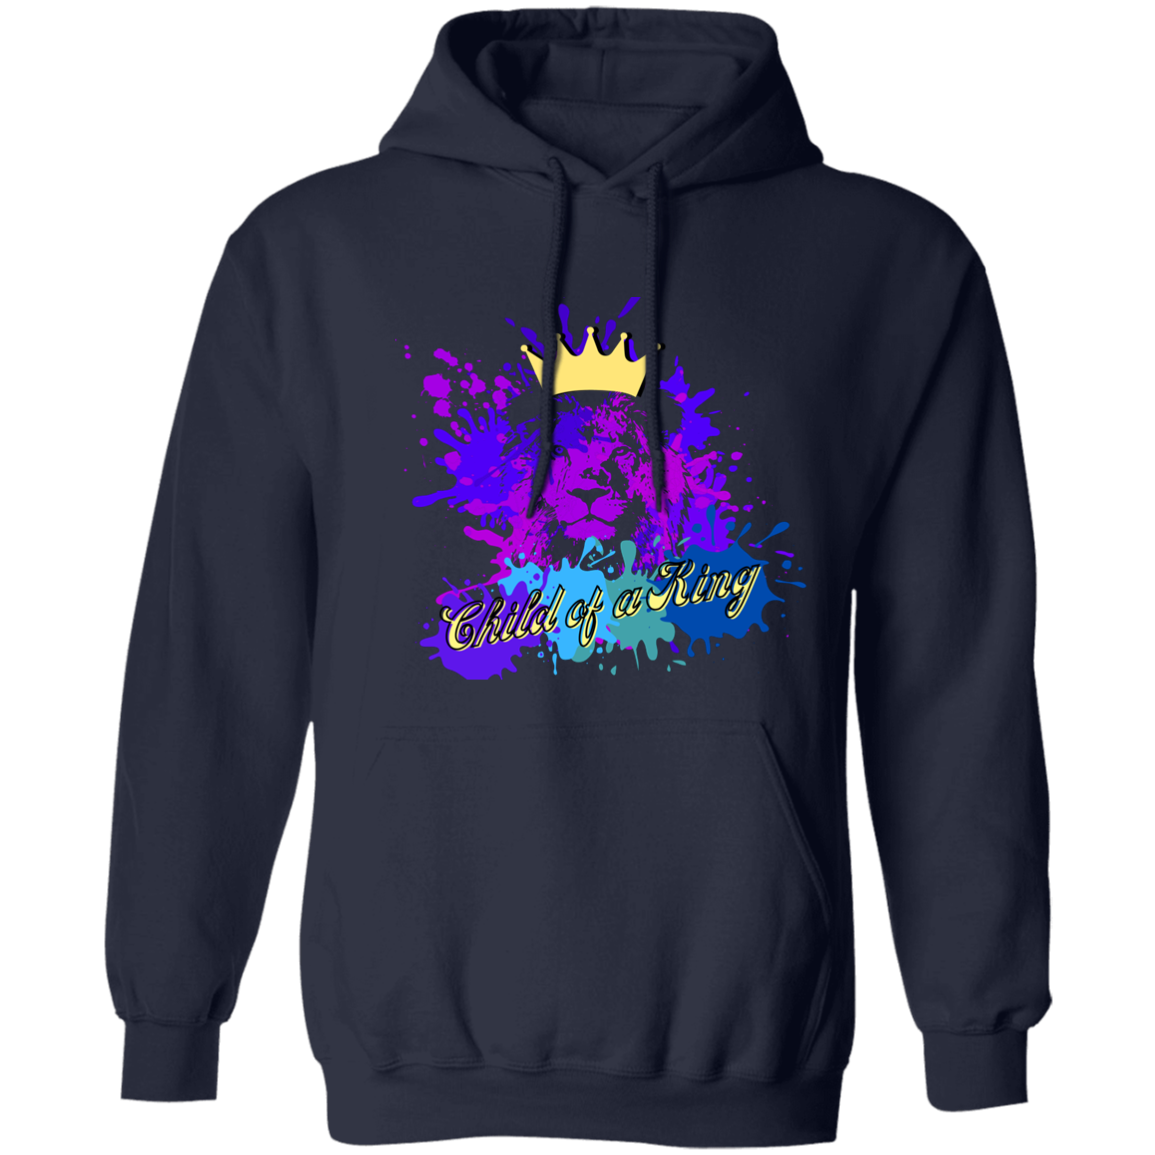 Child of a King Pullover Hoodie